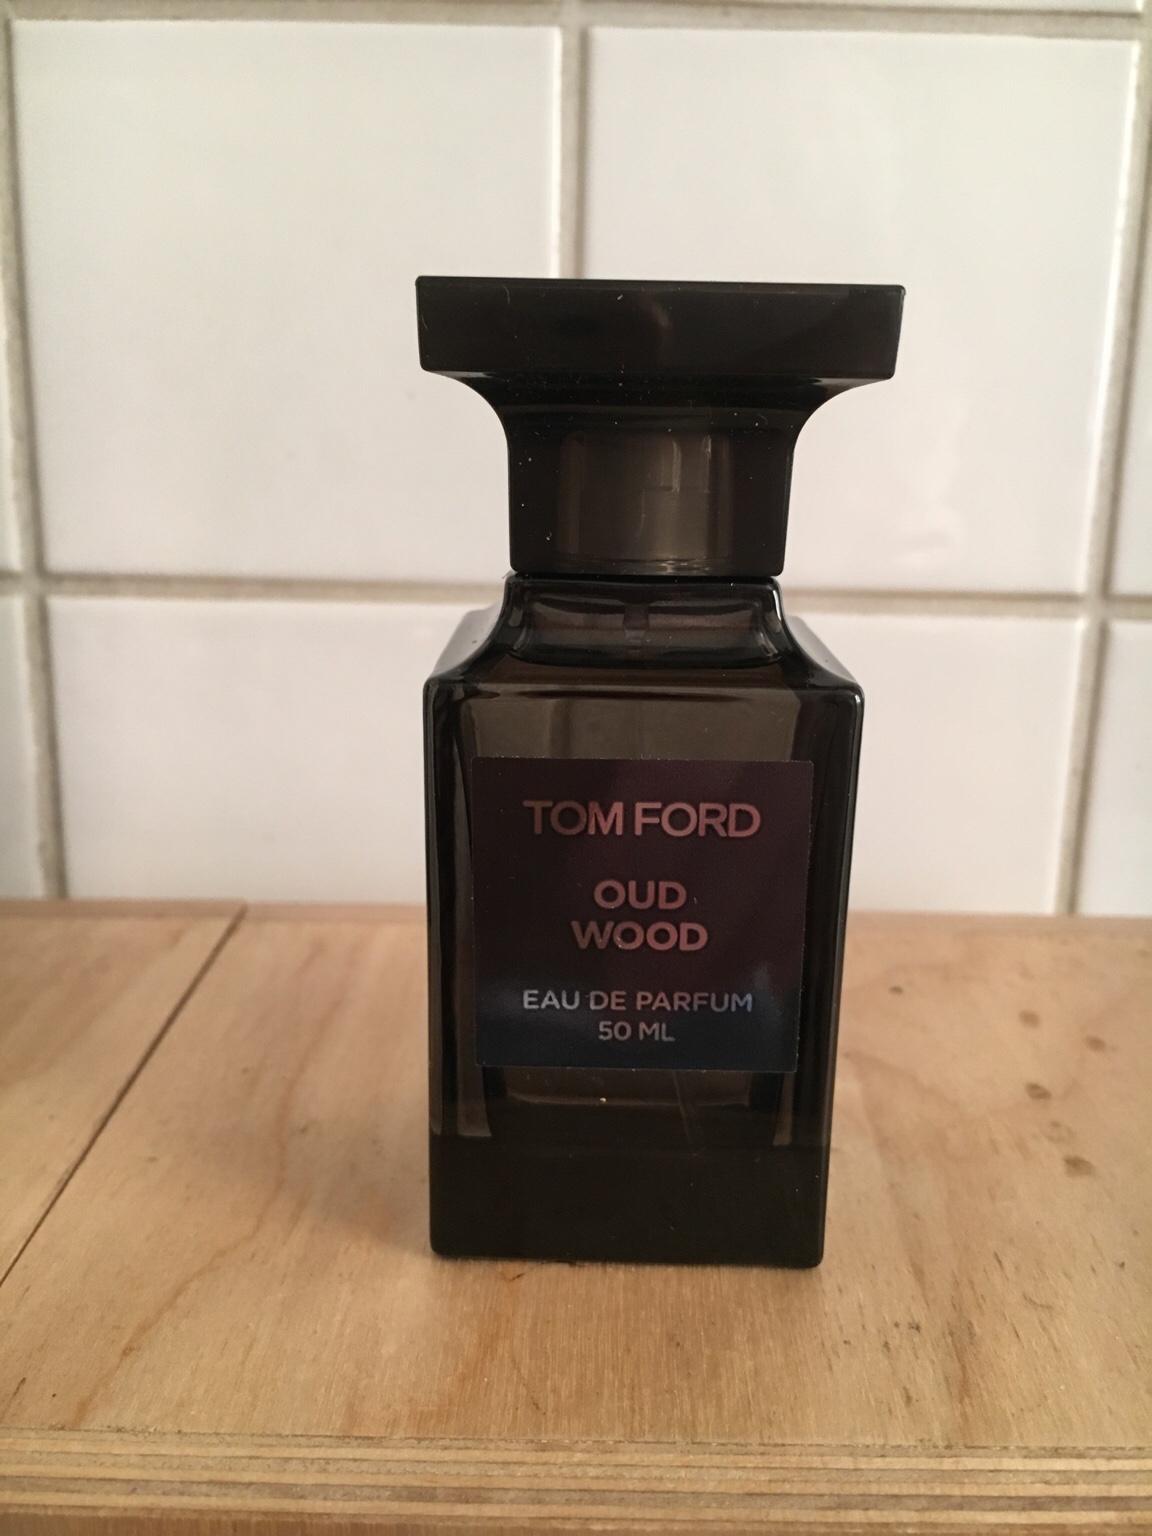 Tom ford OUD WOOD 50ml in London for £65.00 for sale | Shpock